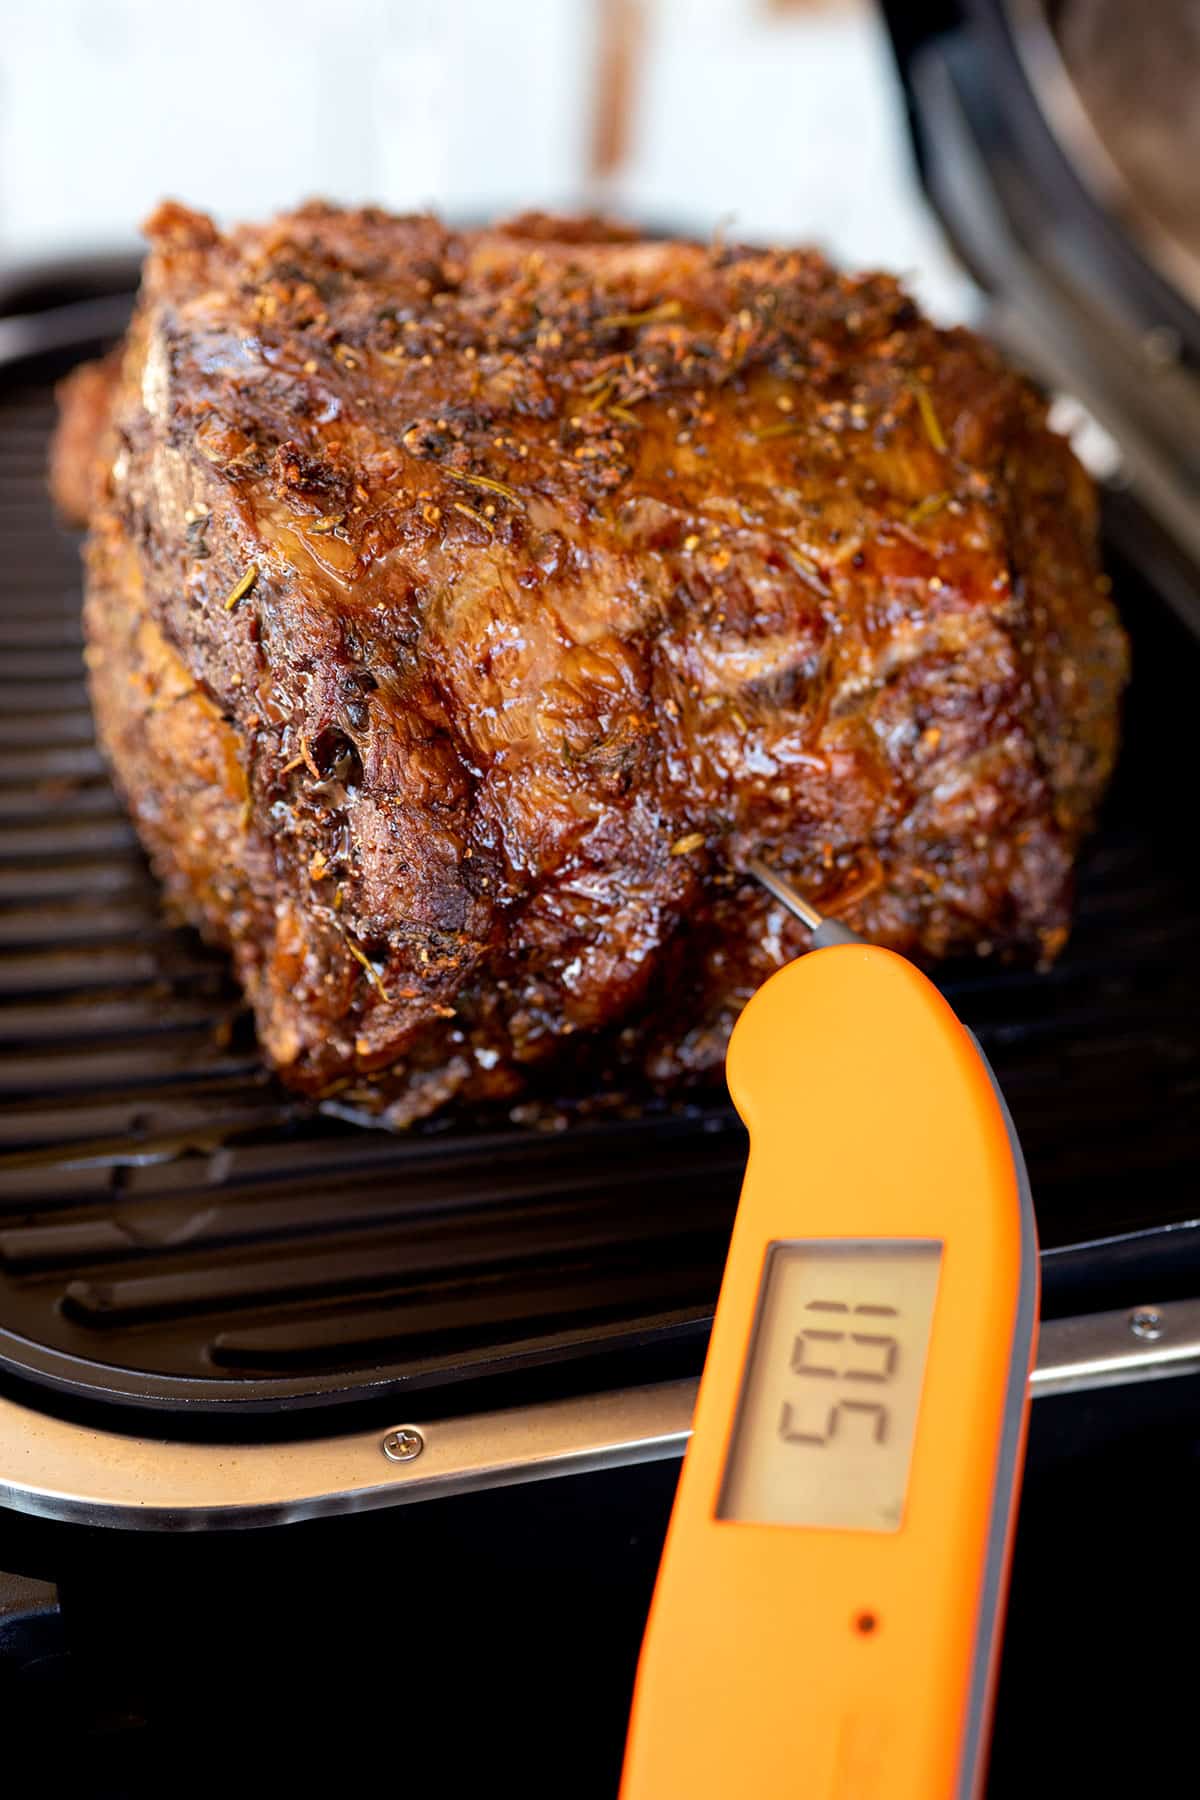 instant read thermometer in prime rib showing temperature of 105F.